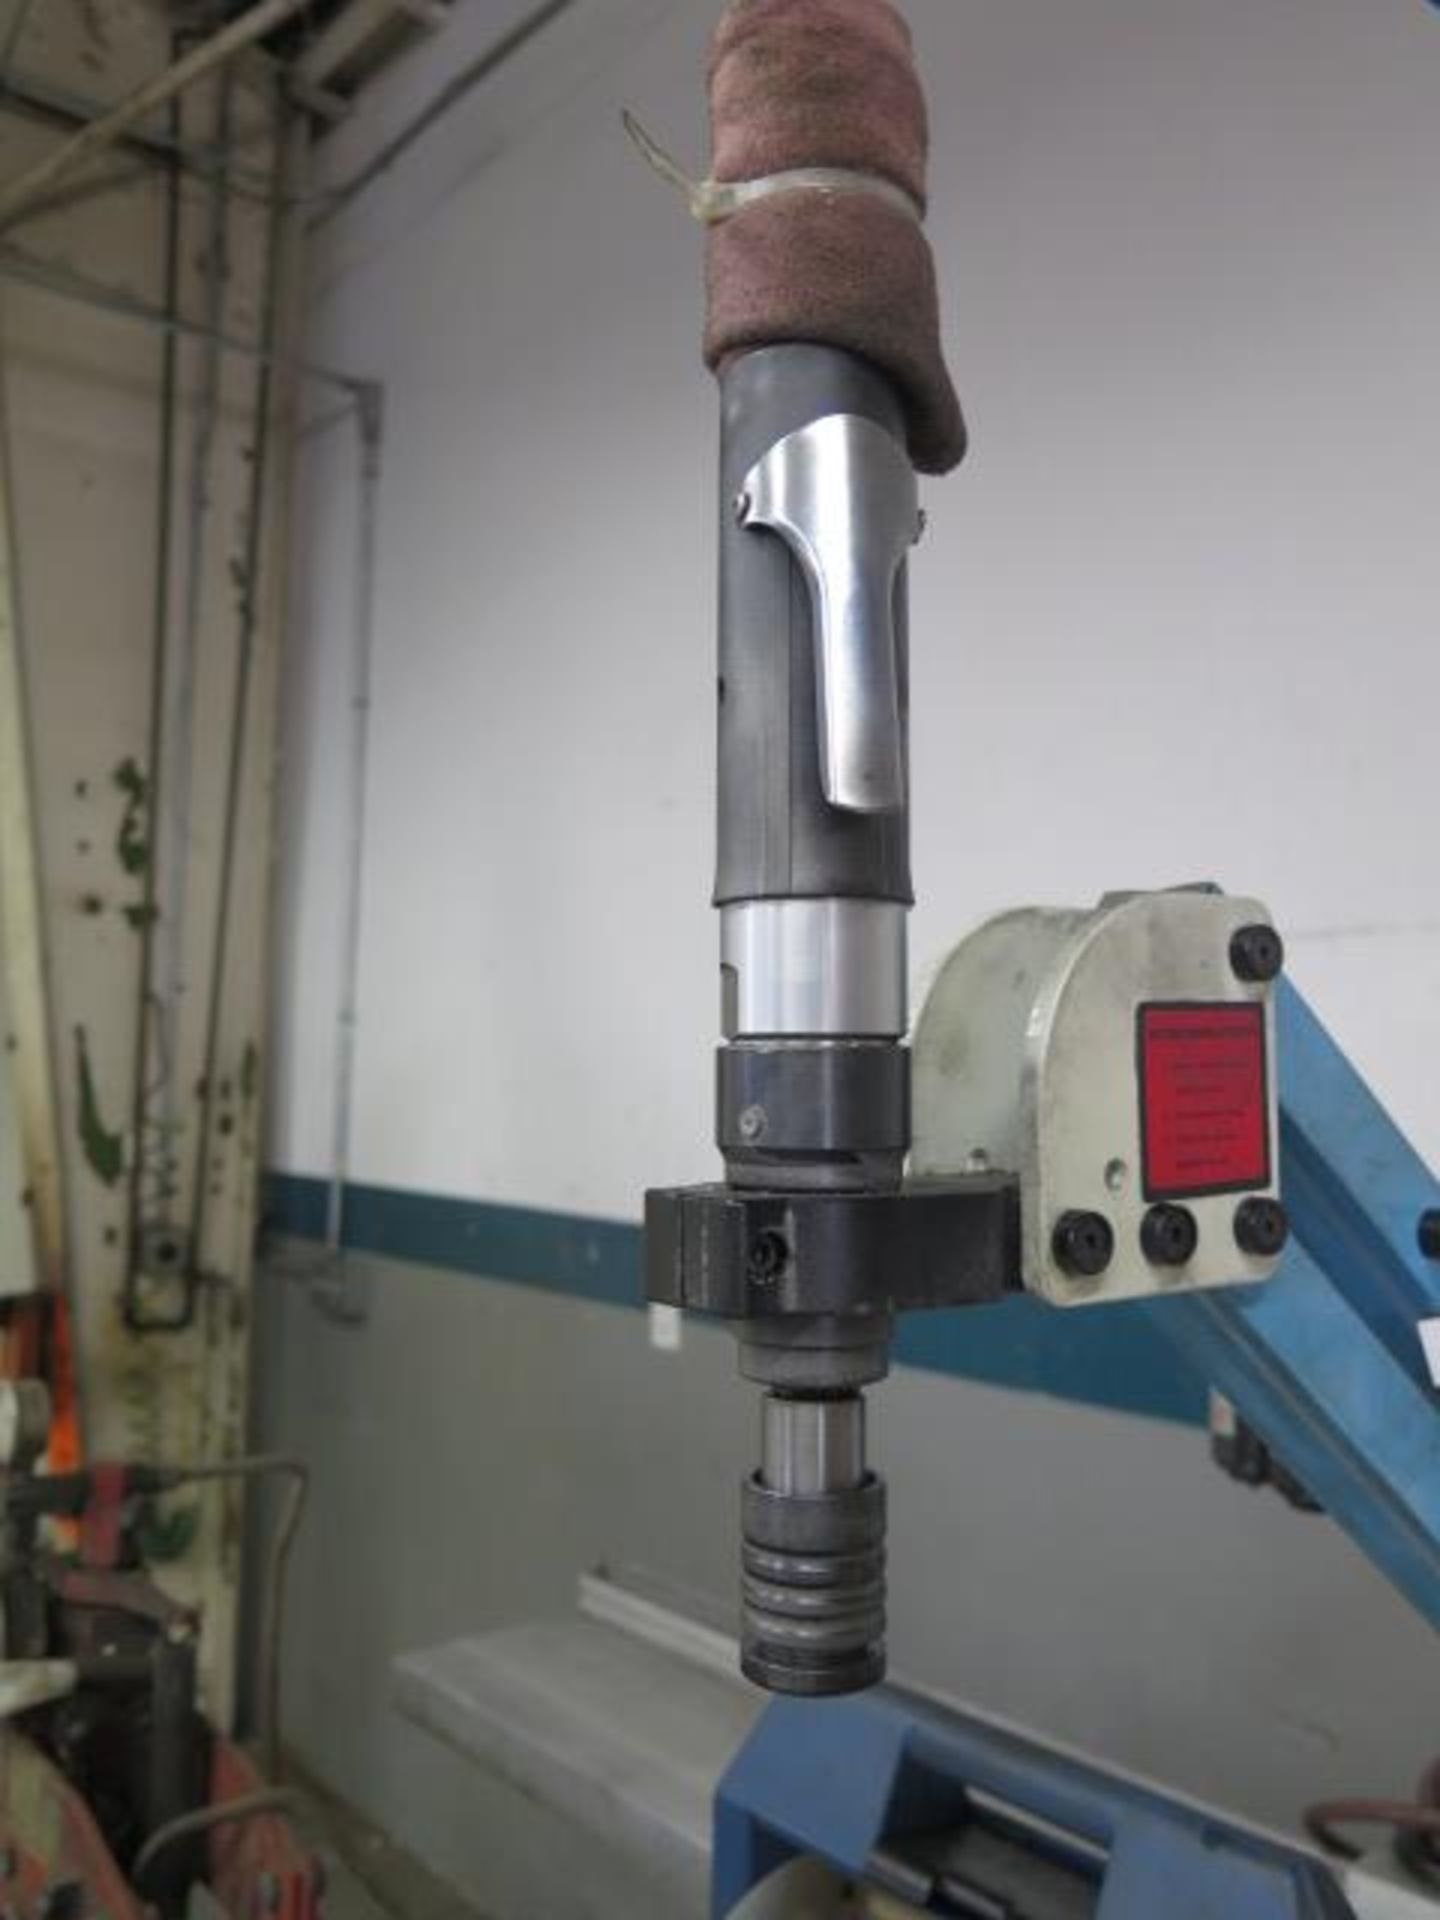 Pneumatic Straight Hole Tapper w/ Arm, 12’ Rail System (SOLD AS-IS - NO WARRANTY) - Image 4 of 8